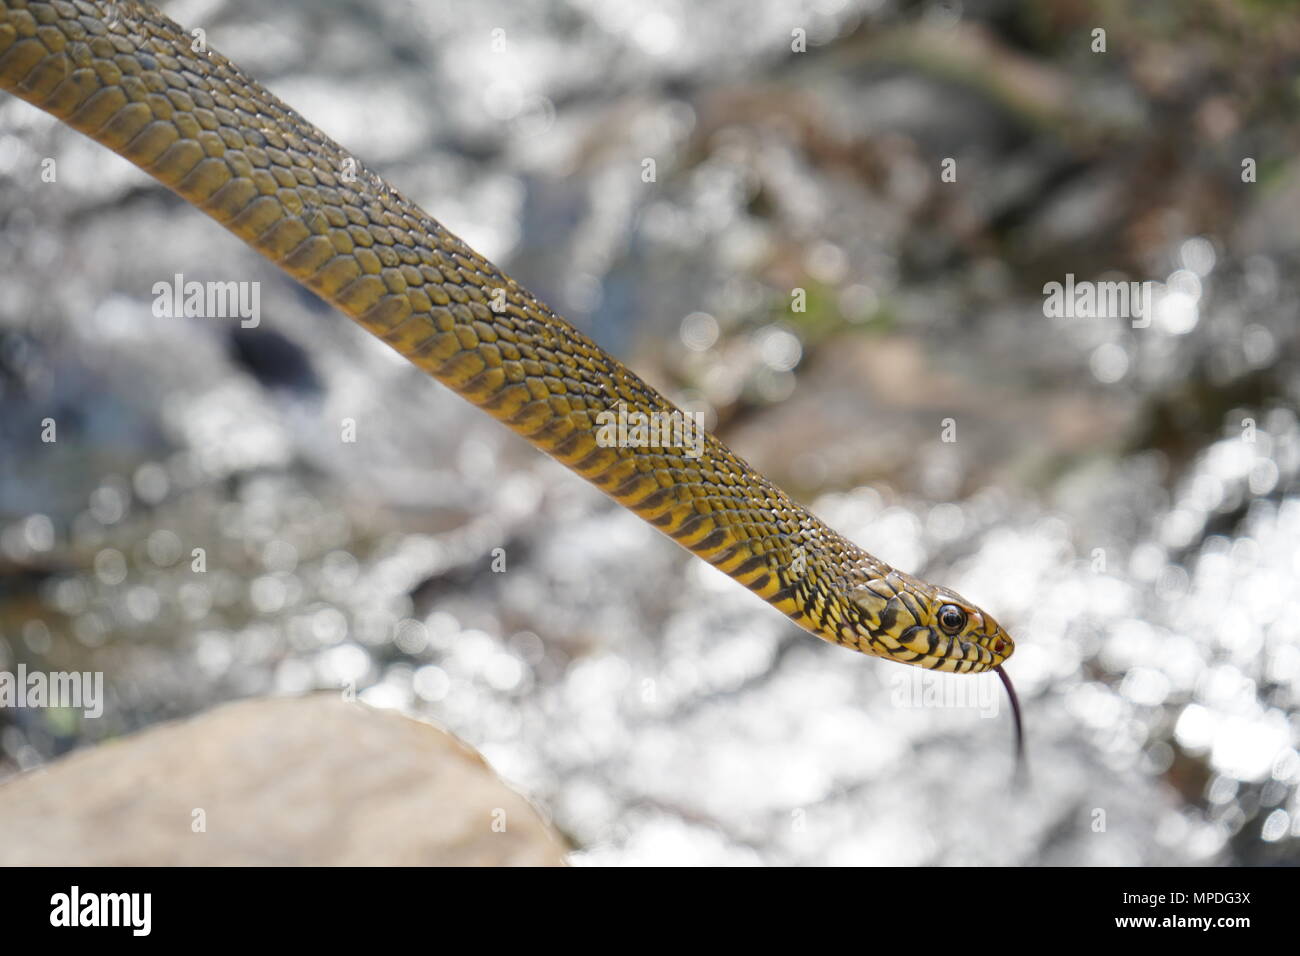 Rat Snake with water stream in background Stock Photo